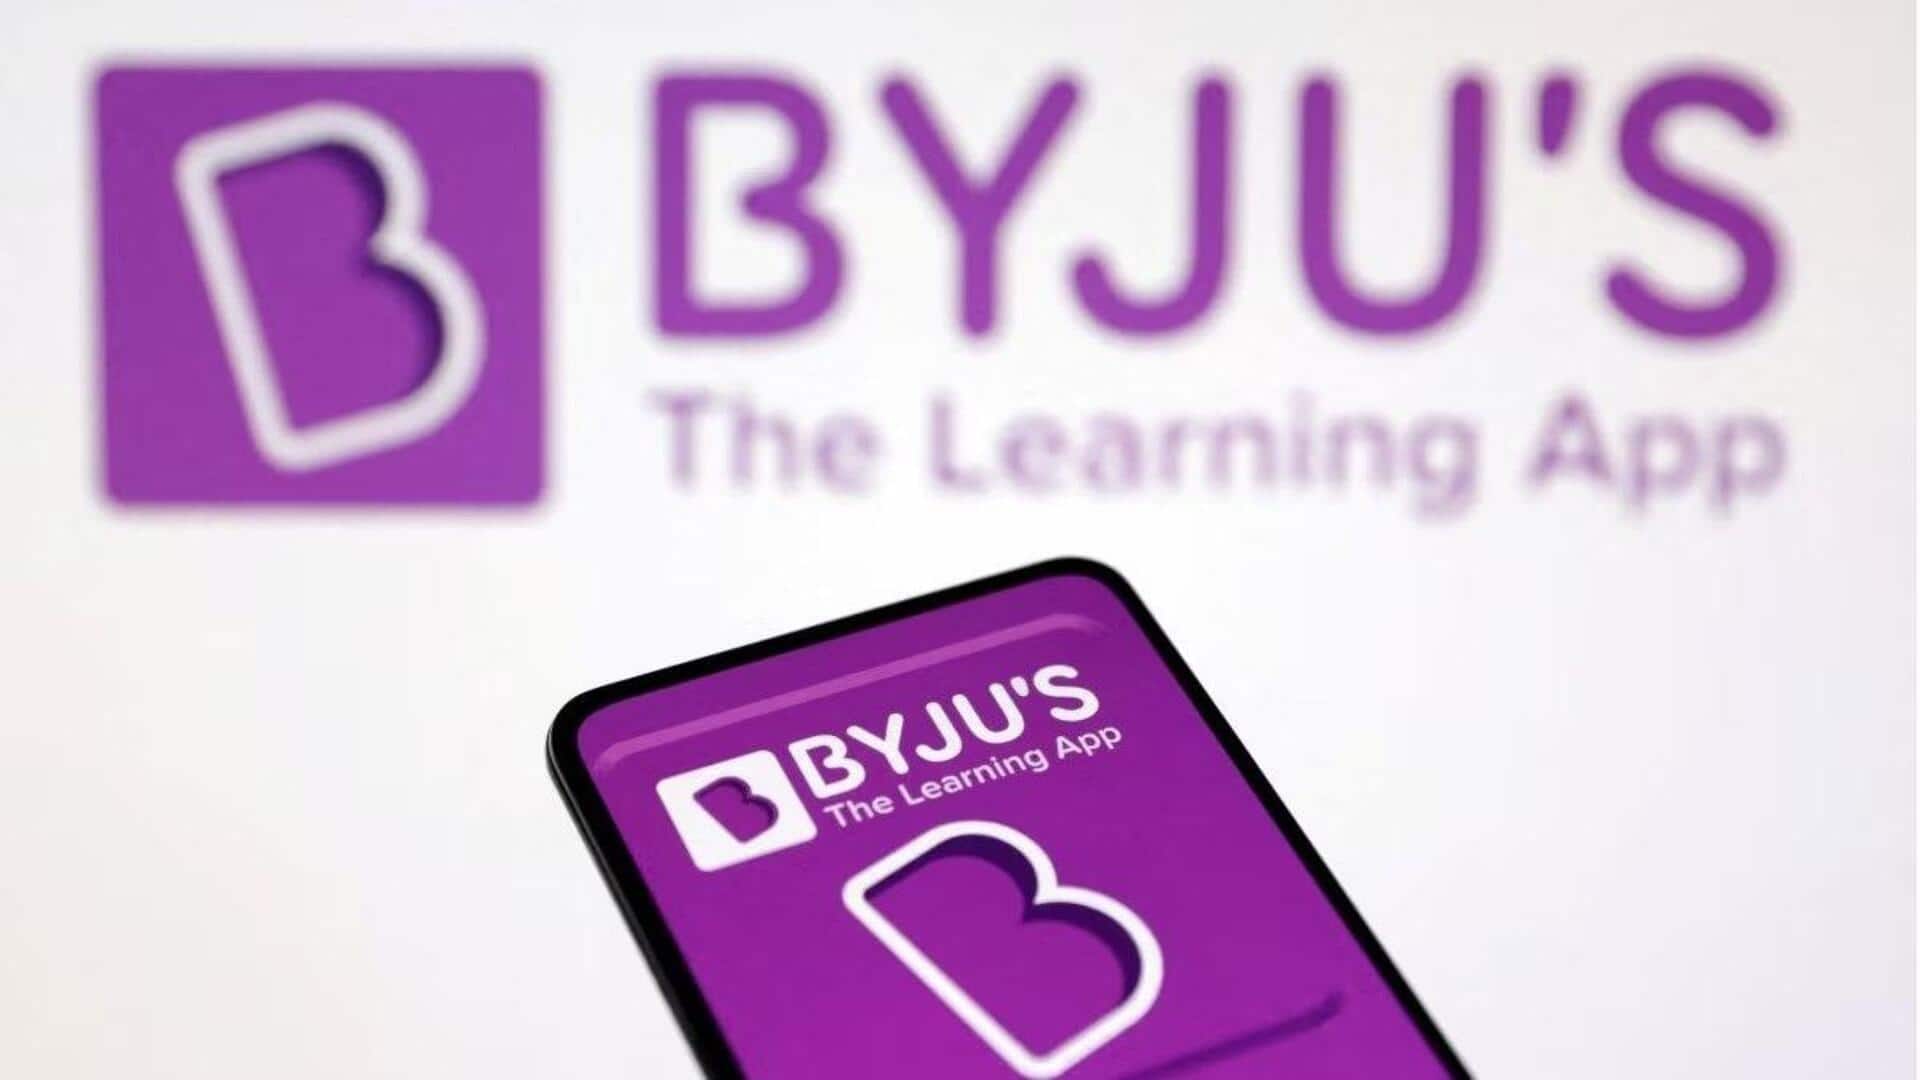 Prosus downgrades edtech giant BYJU's valuation to less than $3bn